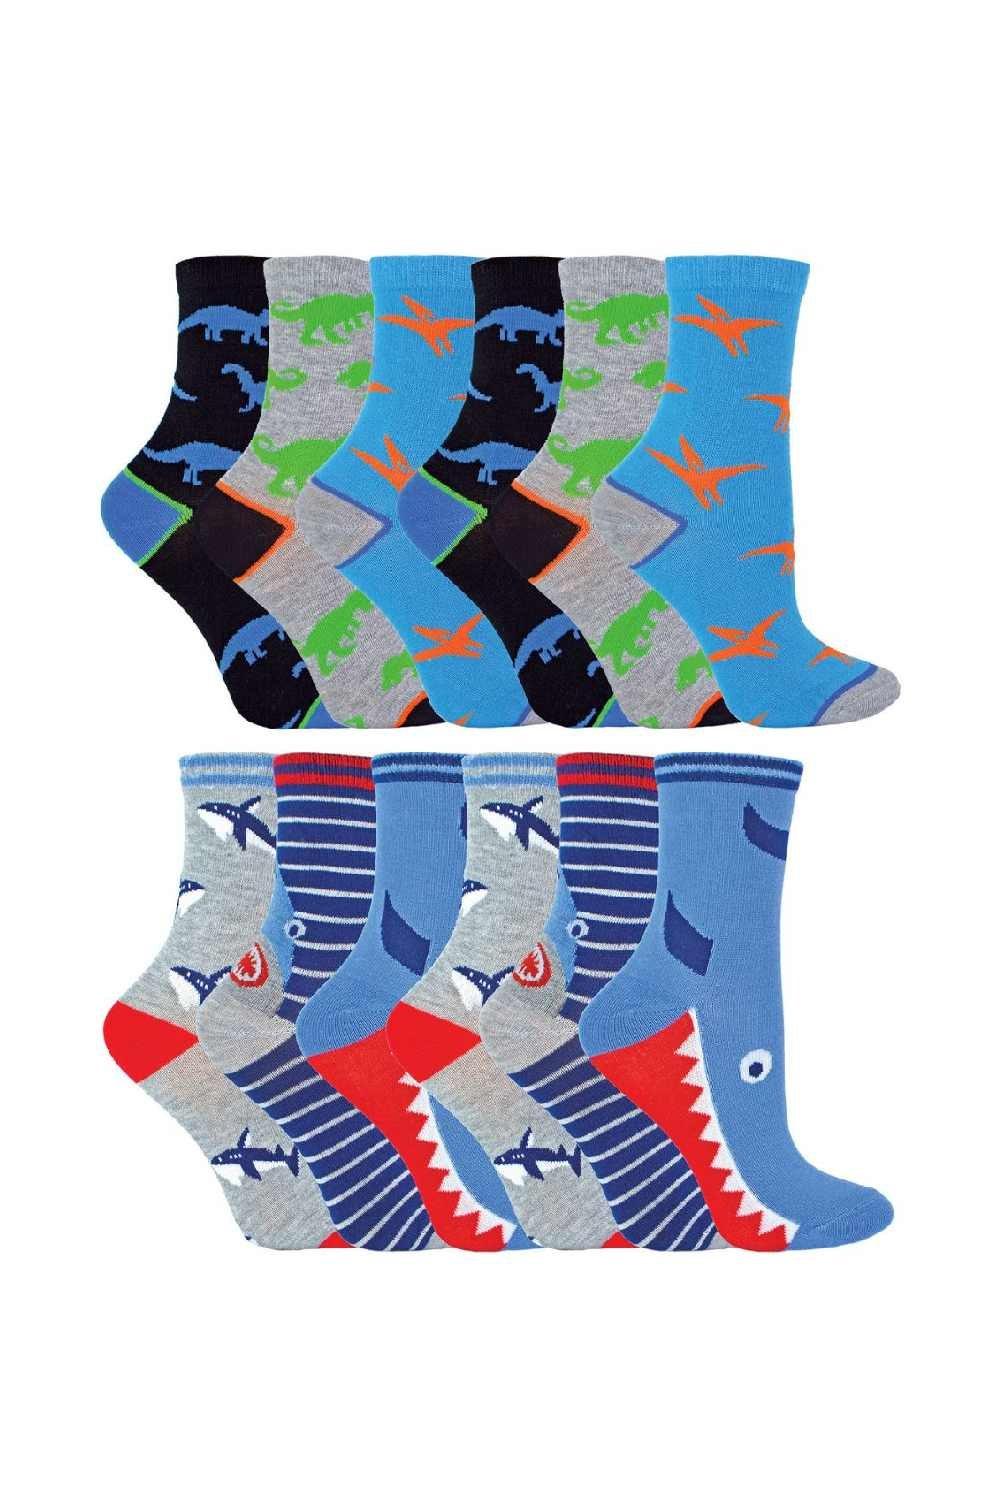 12 Pair Novelty Bamboo Trainer Low Cut Socks with Fun Designs